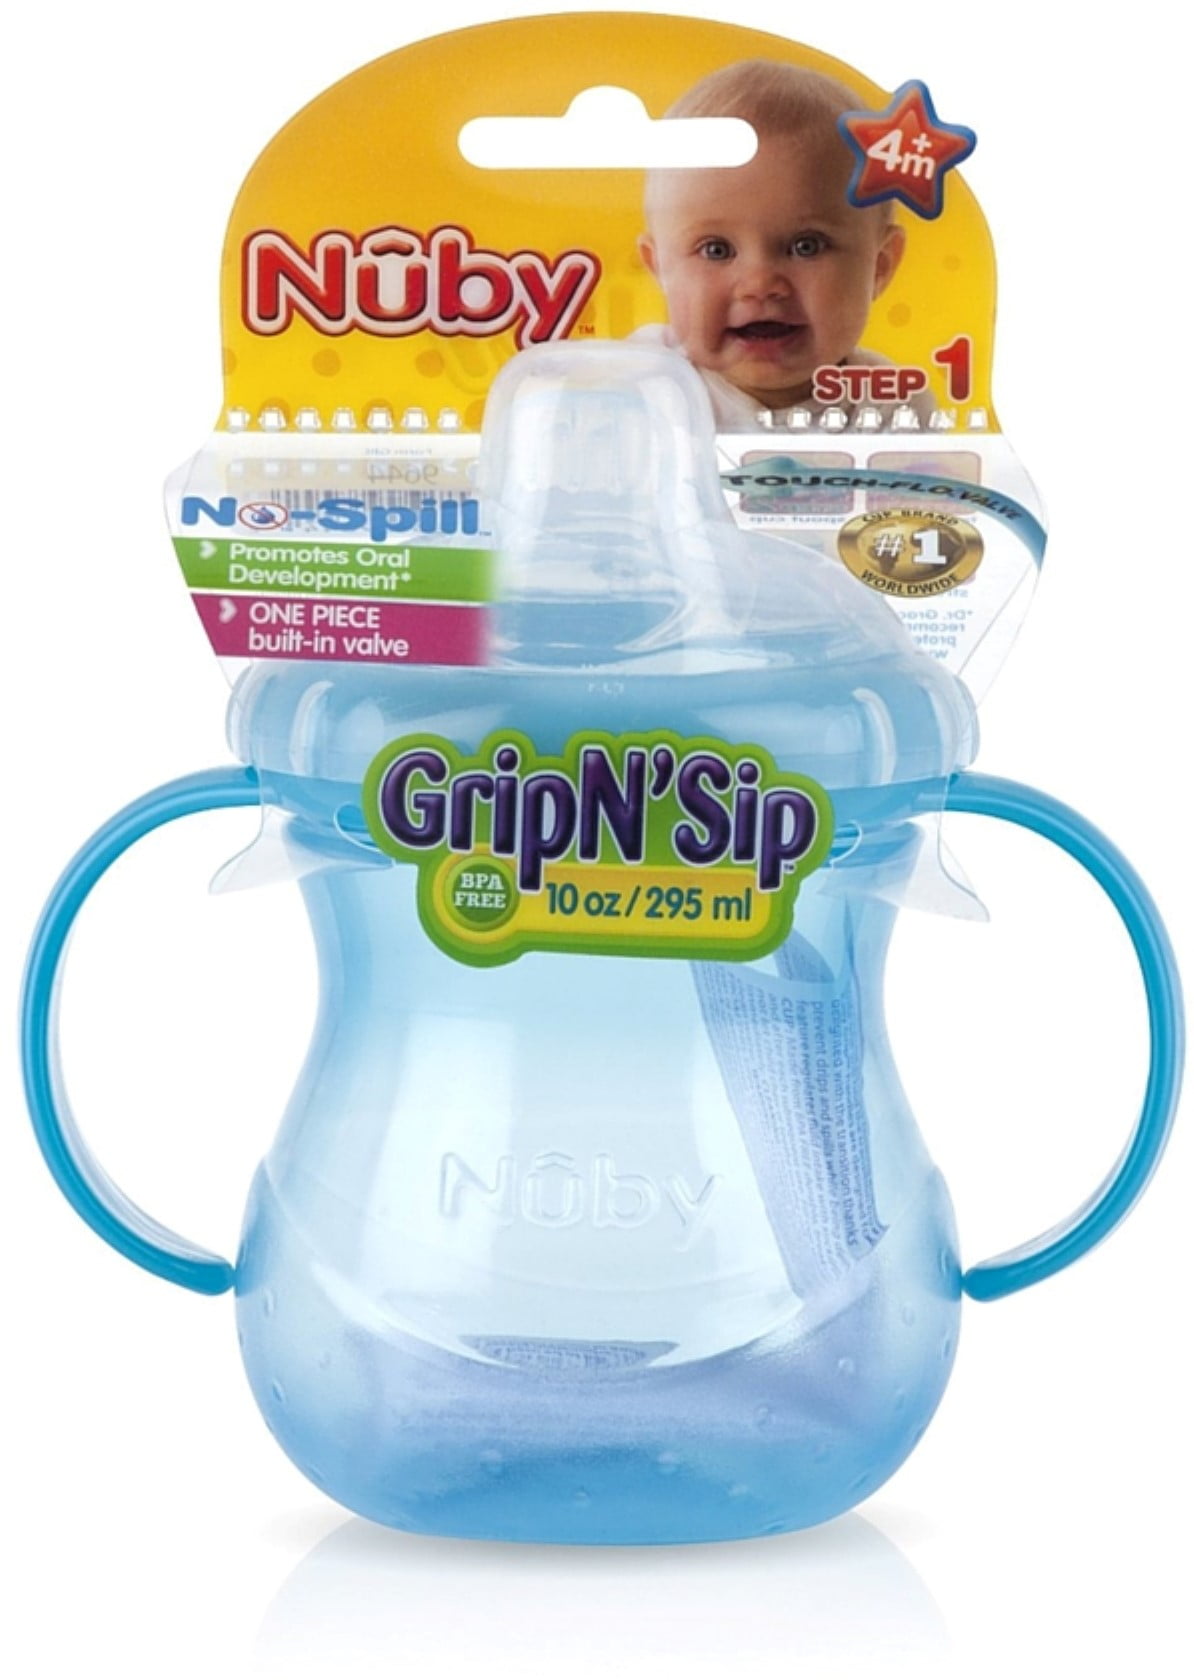 Boy Nuby 3 Piece No-Spill Grip N’ Sip Cup with Soft Flex Spout 10 Ounce 2 Handle with Clik It Lock Feature 